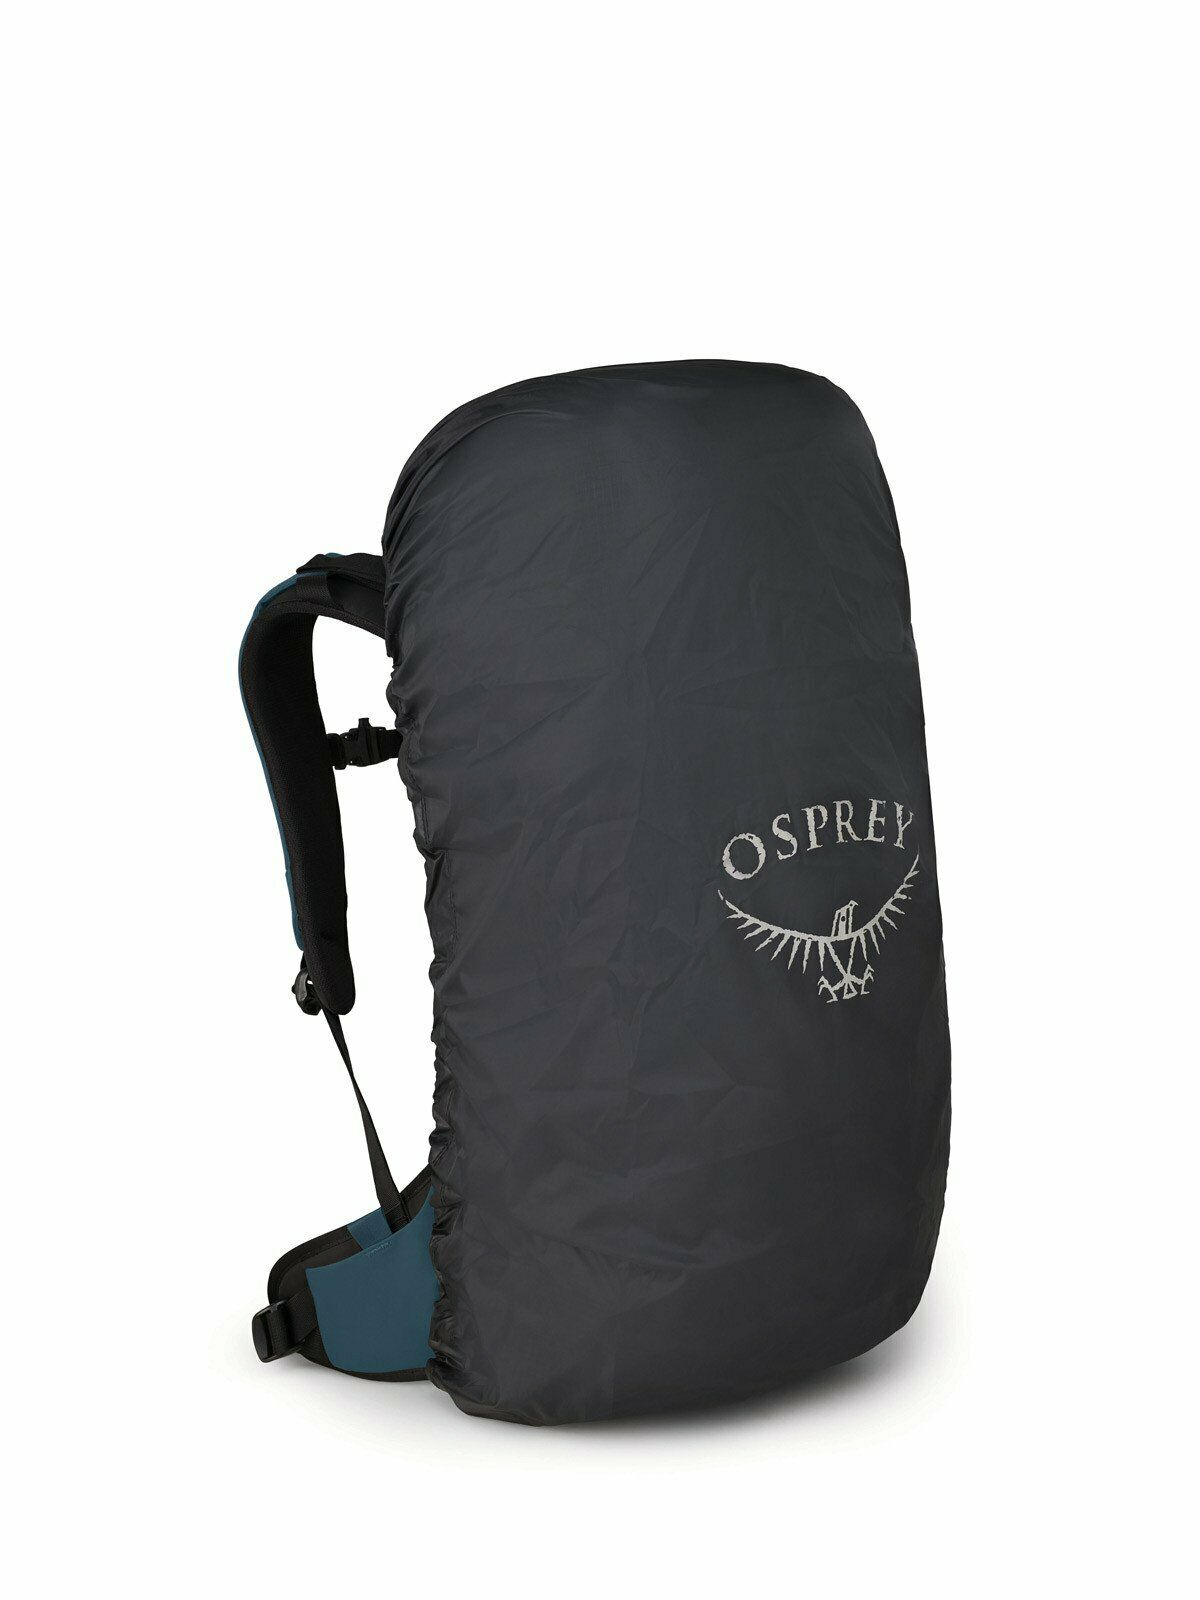 Osprey Archeon 30 Backpack Hiking Day Pack Backpacking Canvas Climbing